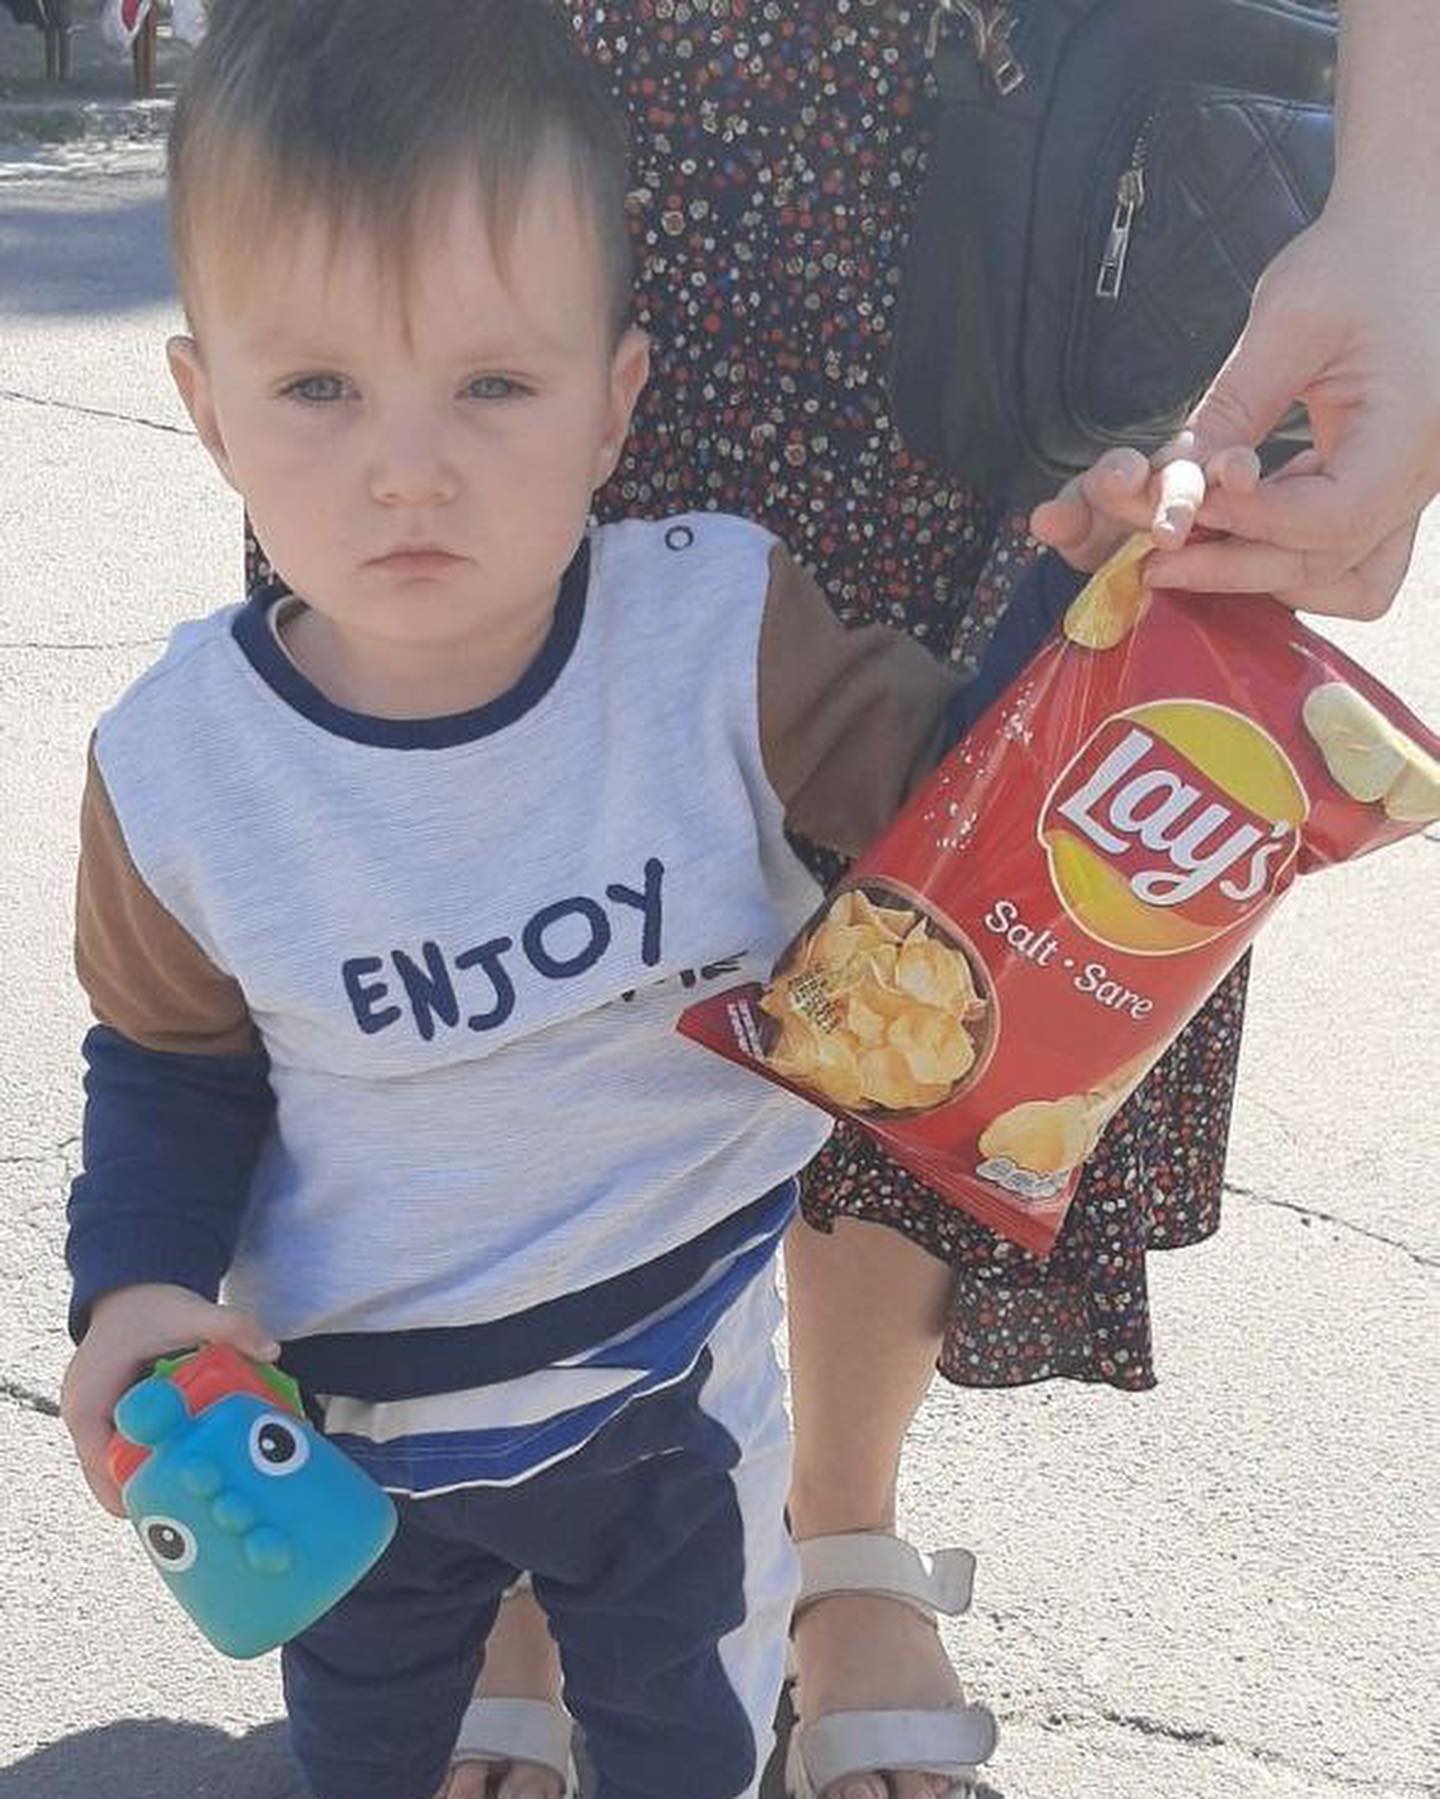 A woman holding a baby holding a bag of chips.